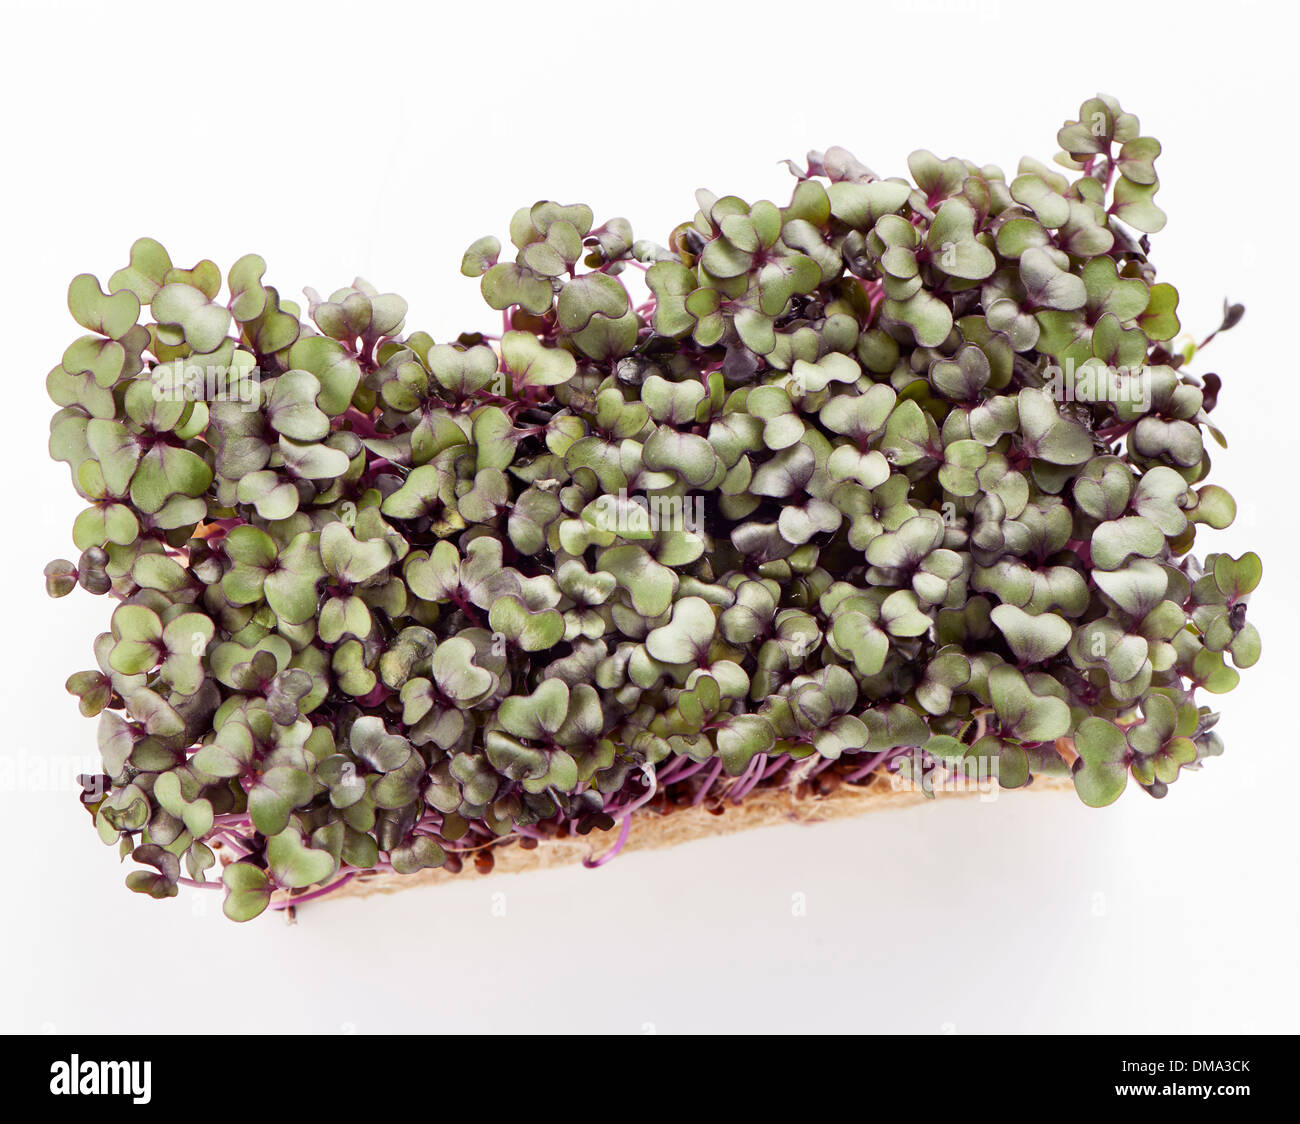 Patch of fresh growht purple garden cress isolated on a white background shot from above Stock Photo